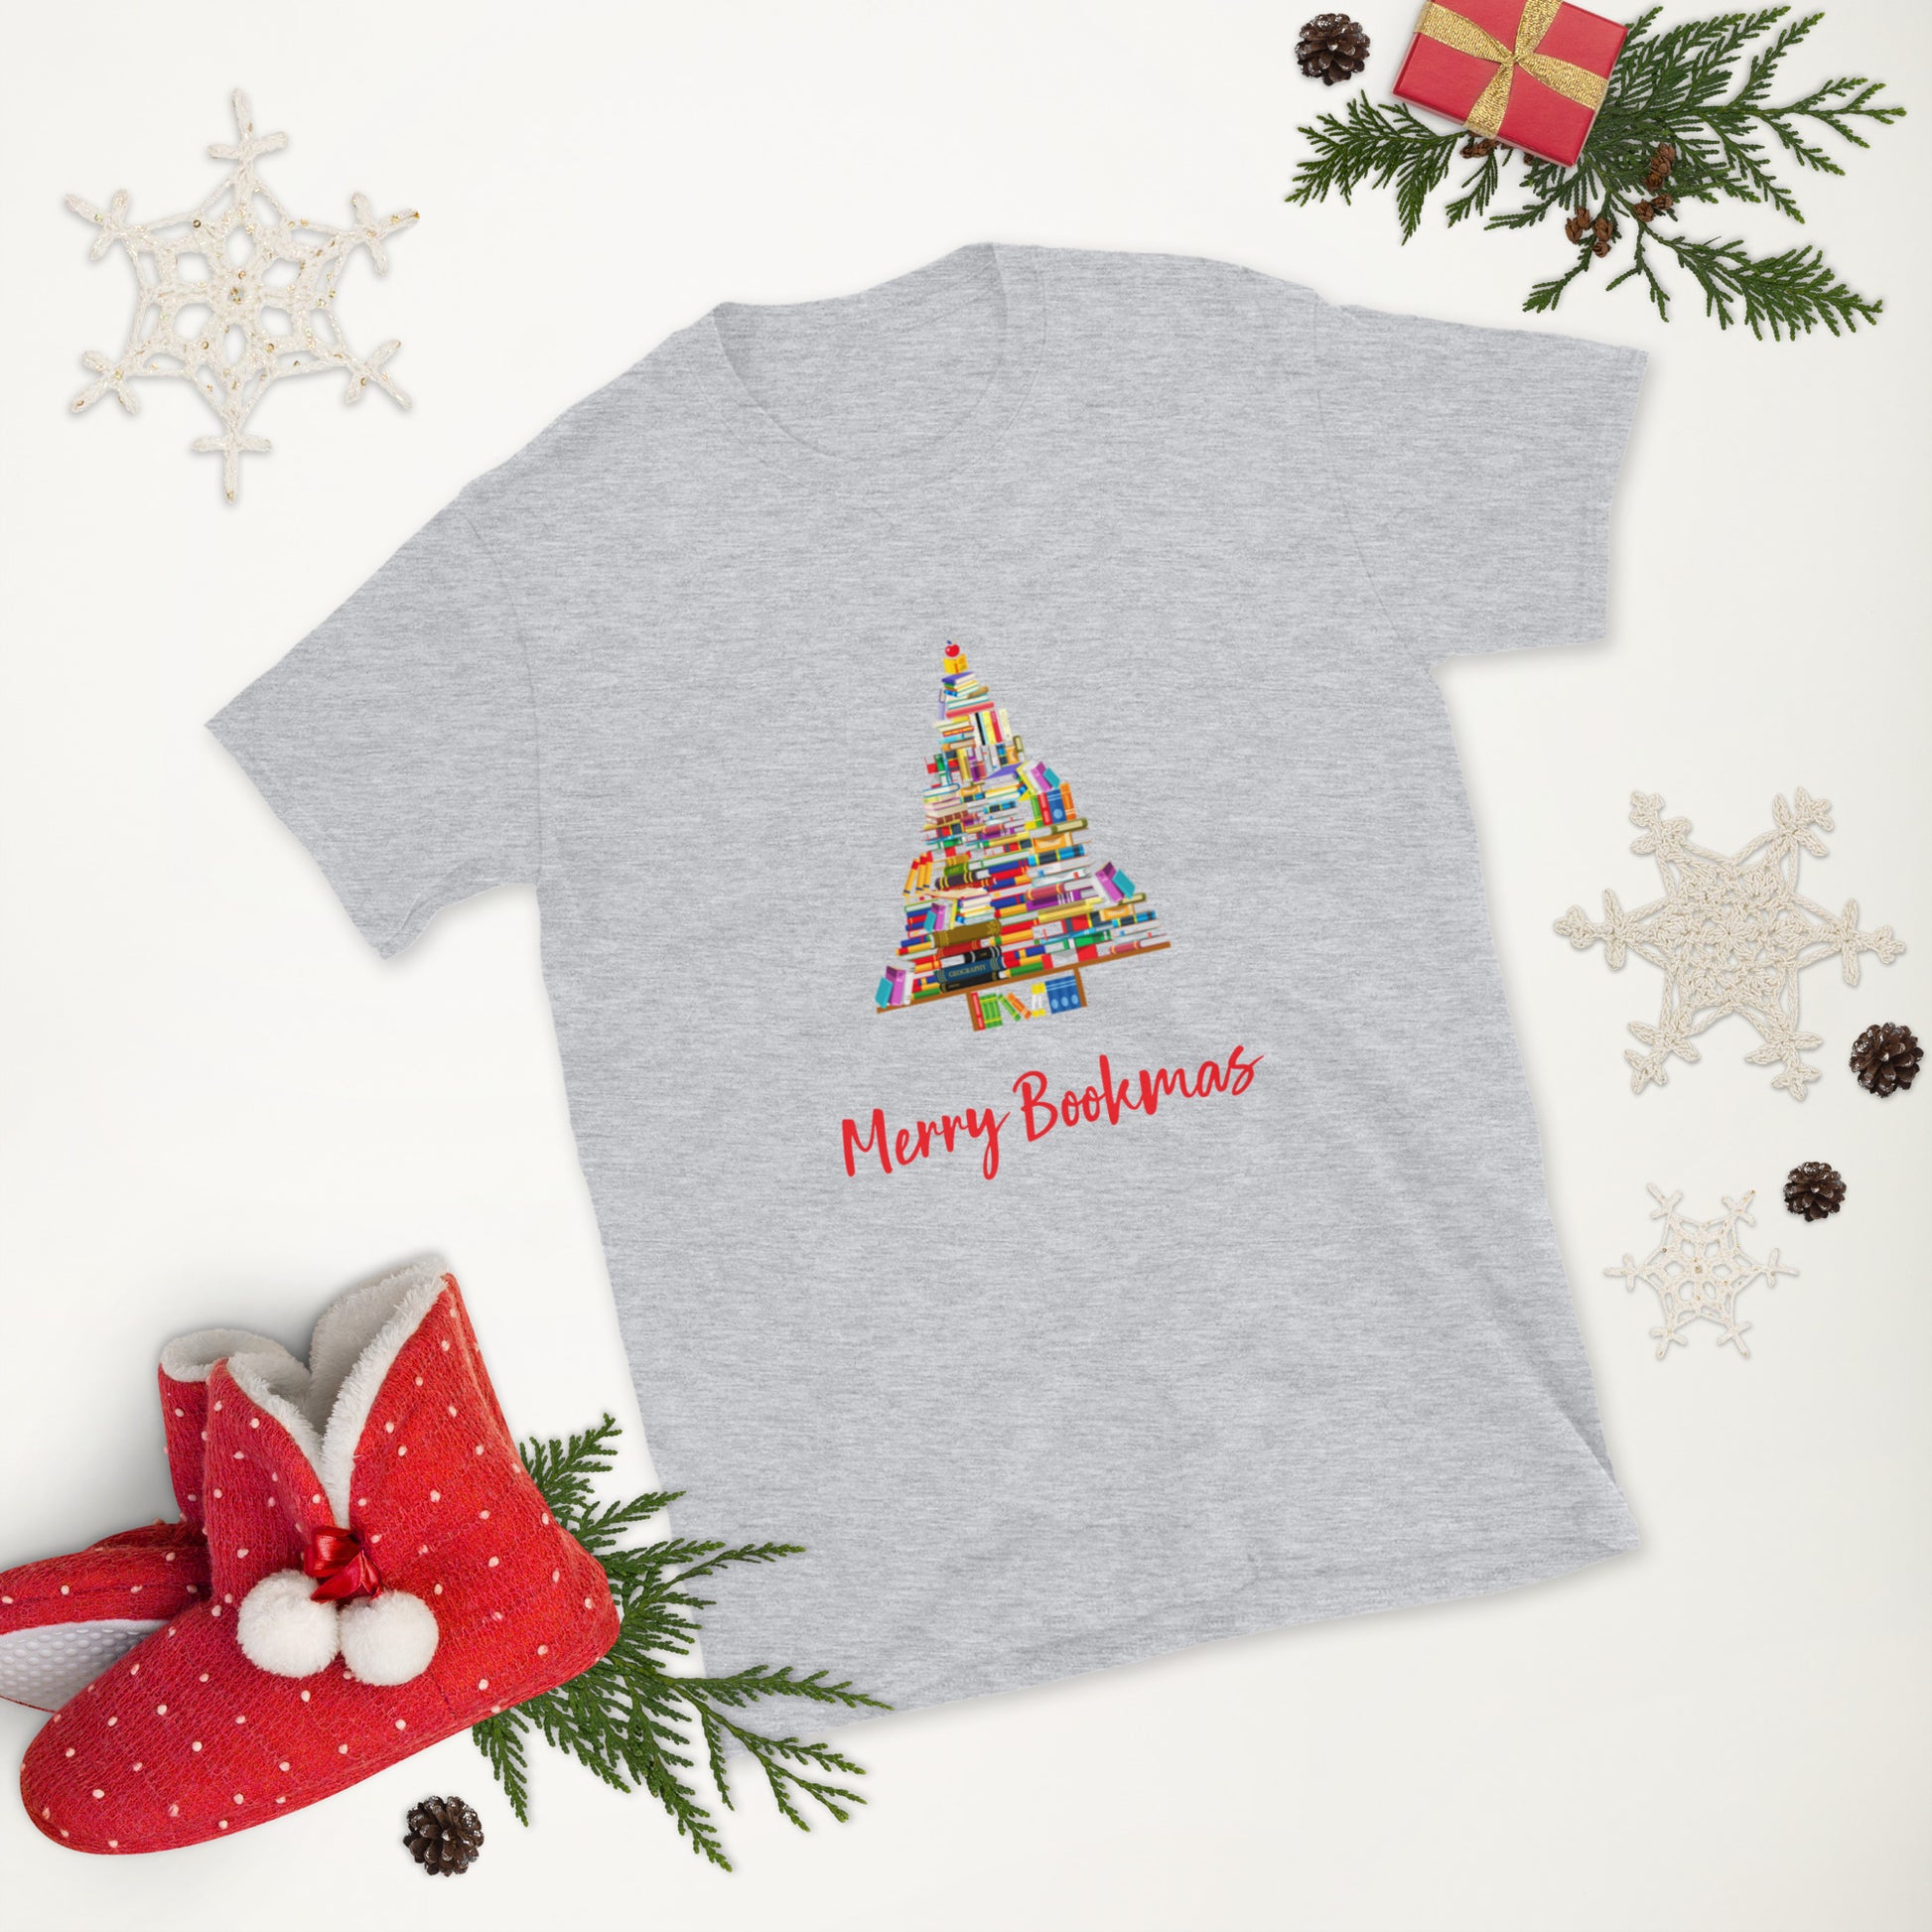 Merry Bookmas Short-Sleeve Unisex T-Shirt - The Spinster Librarian Shop